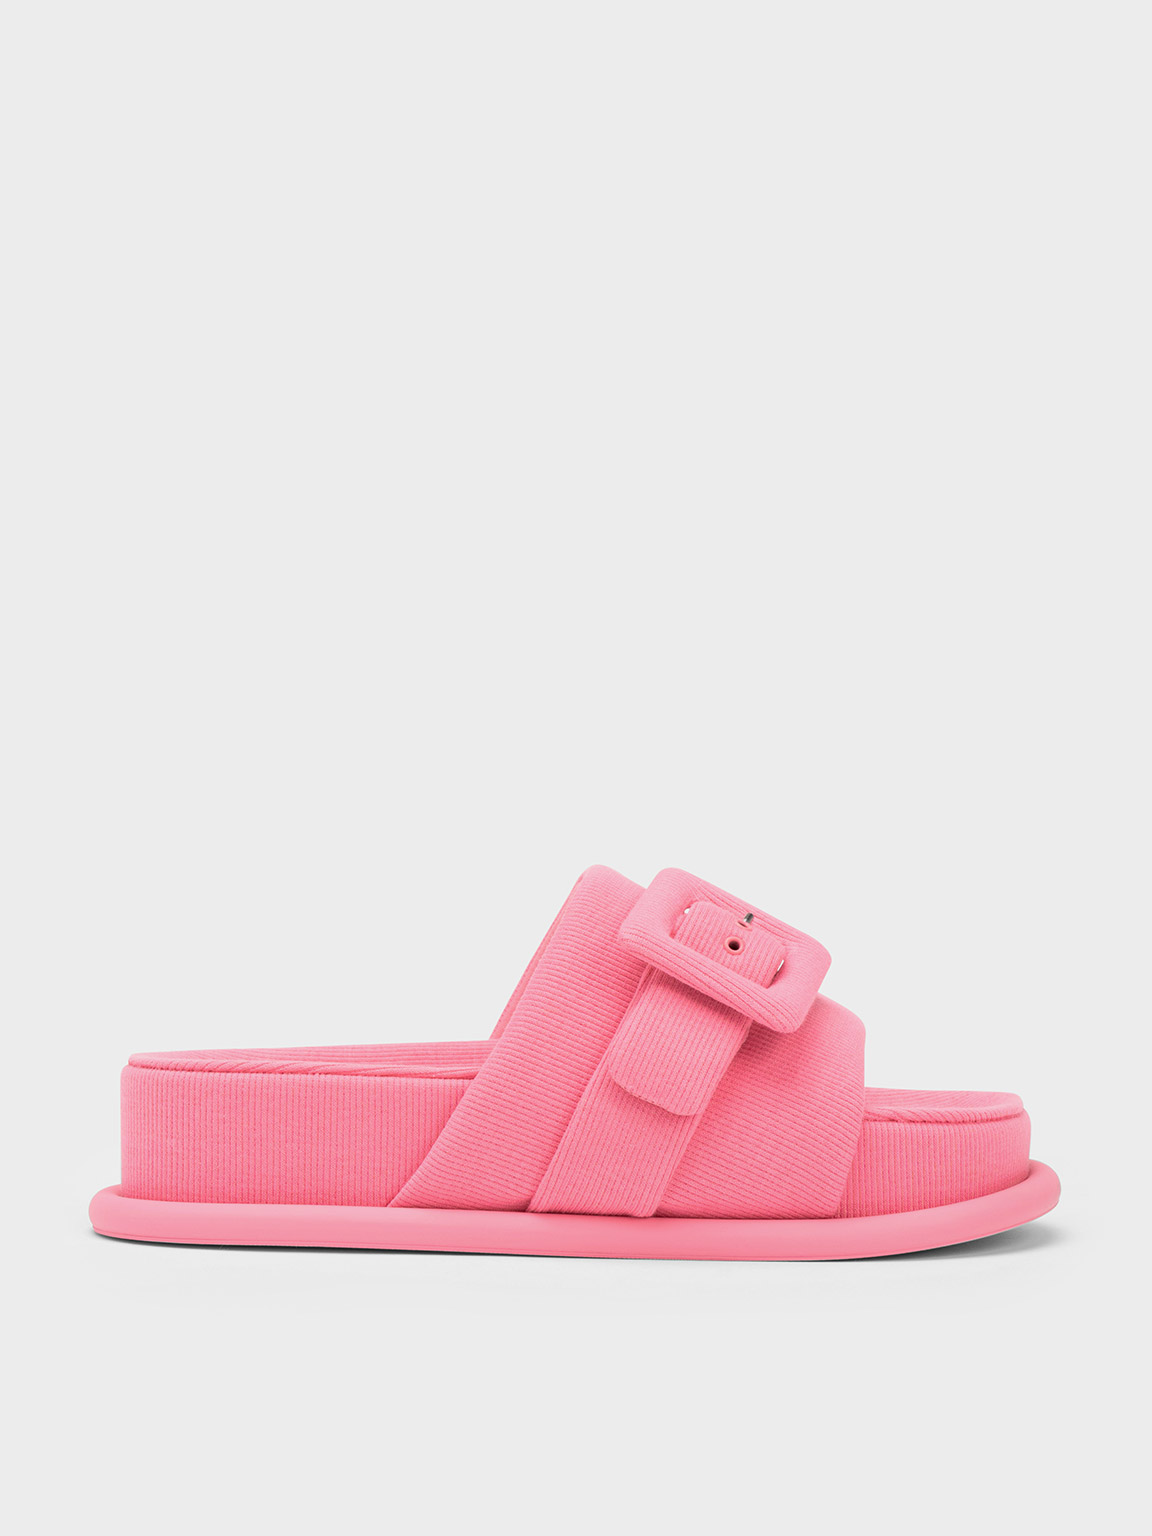 Charles & Keith Woven Buckled Slide Sandals In Pink